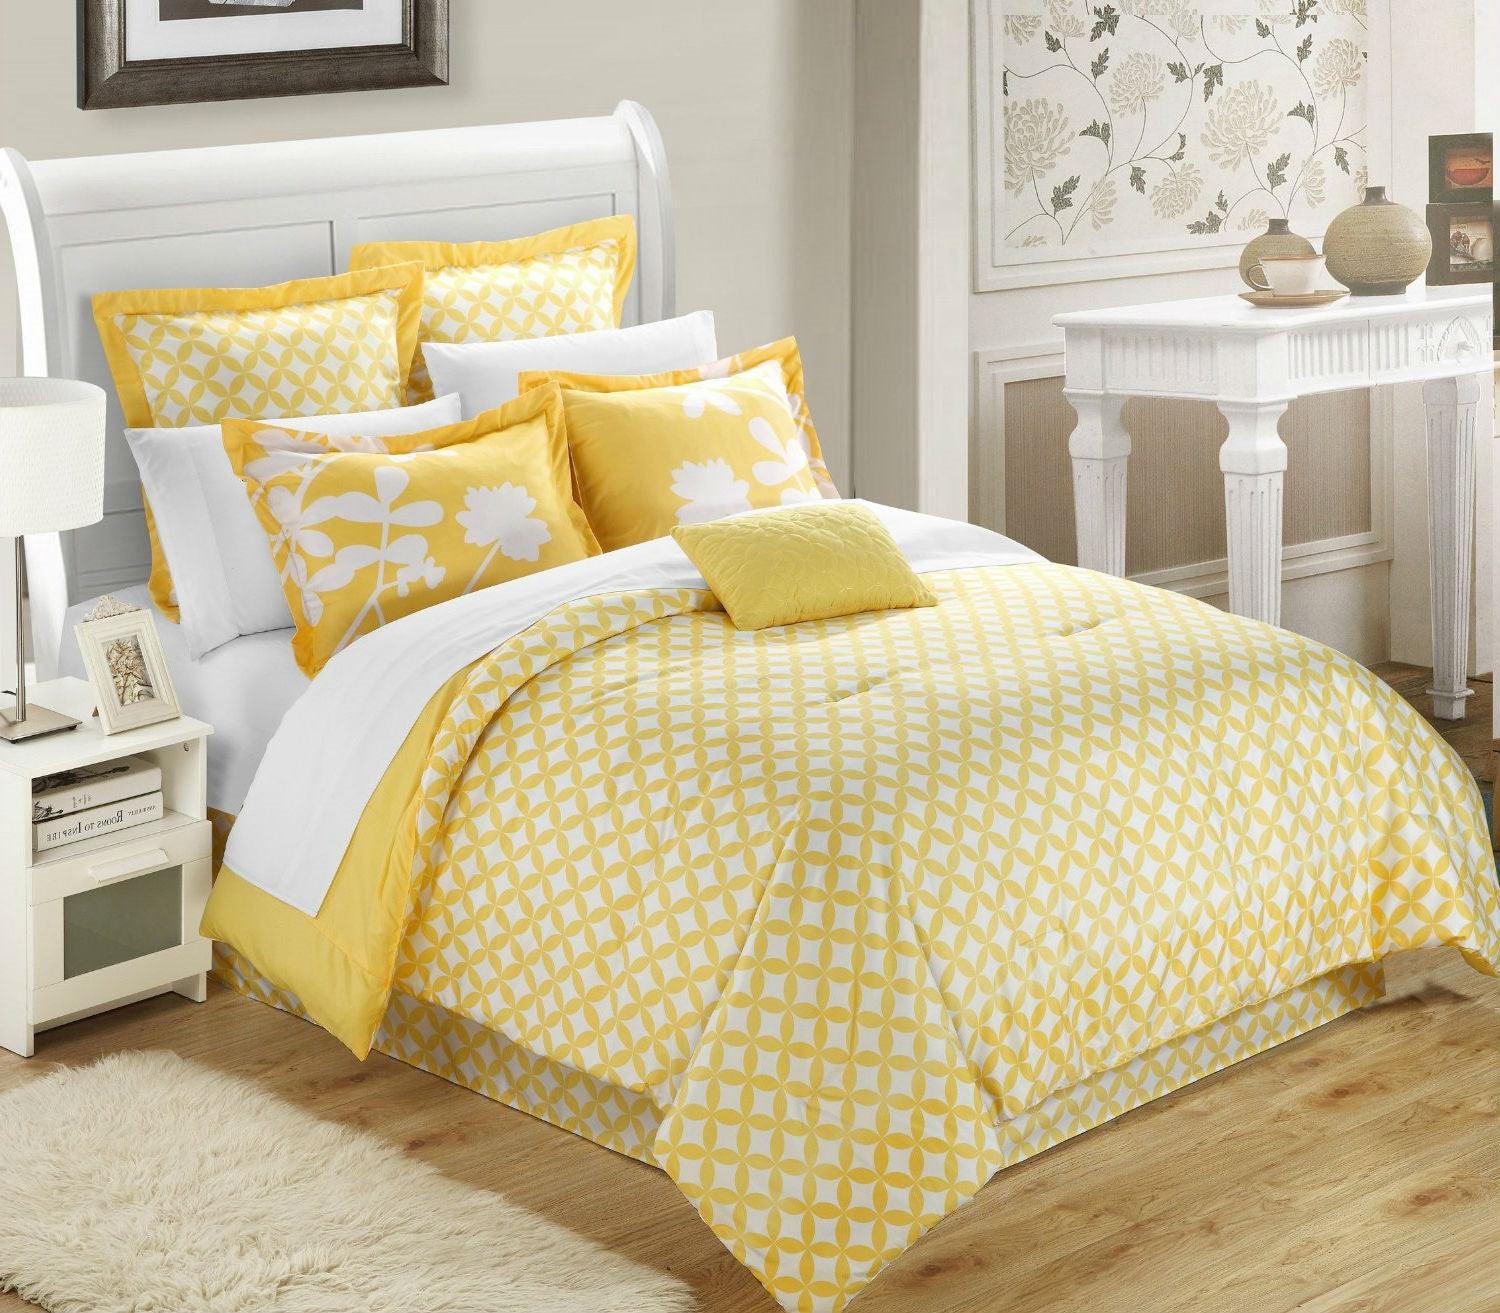 Queen size Yellow 7-Piece Floral Bed in a Bag Comforter Set - beddingbag.com